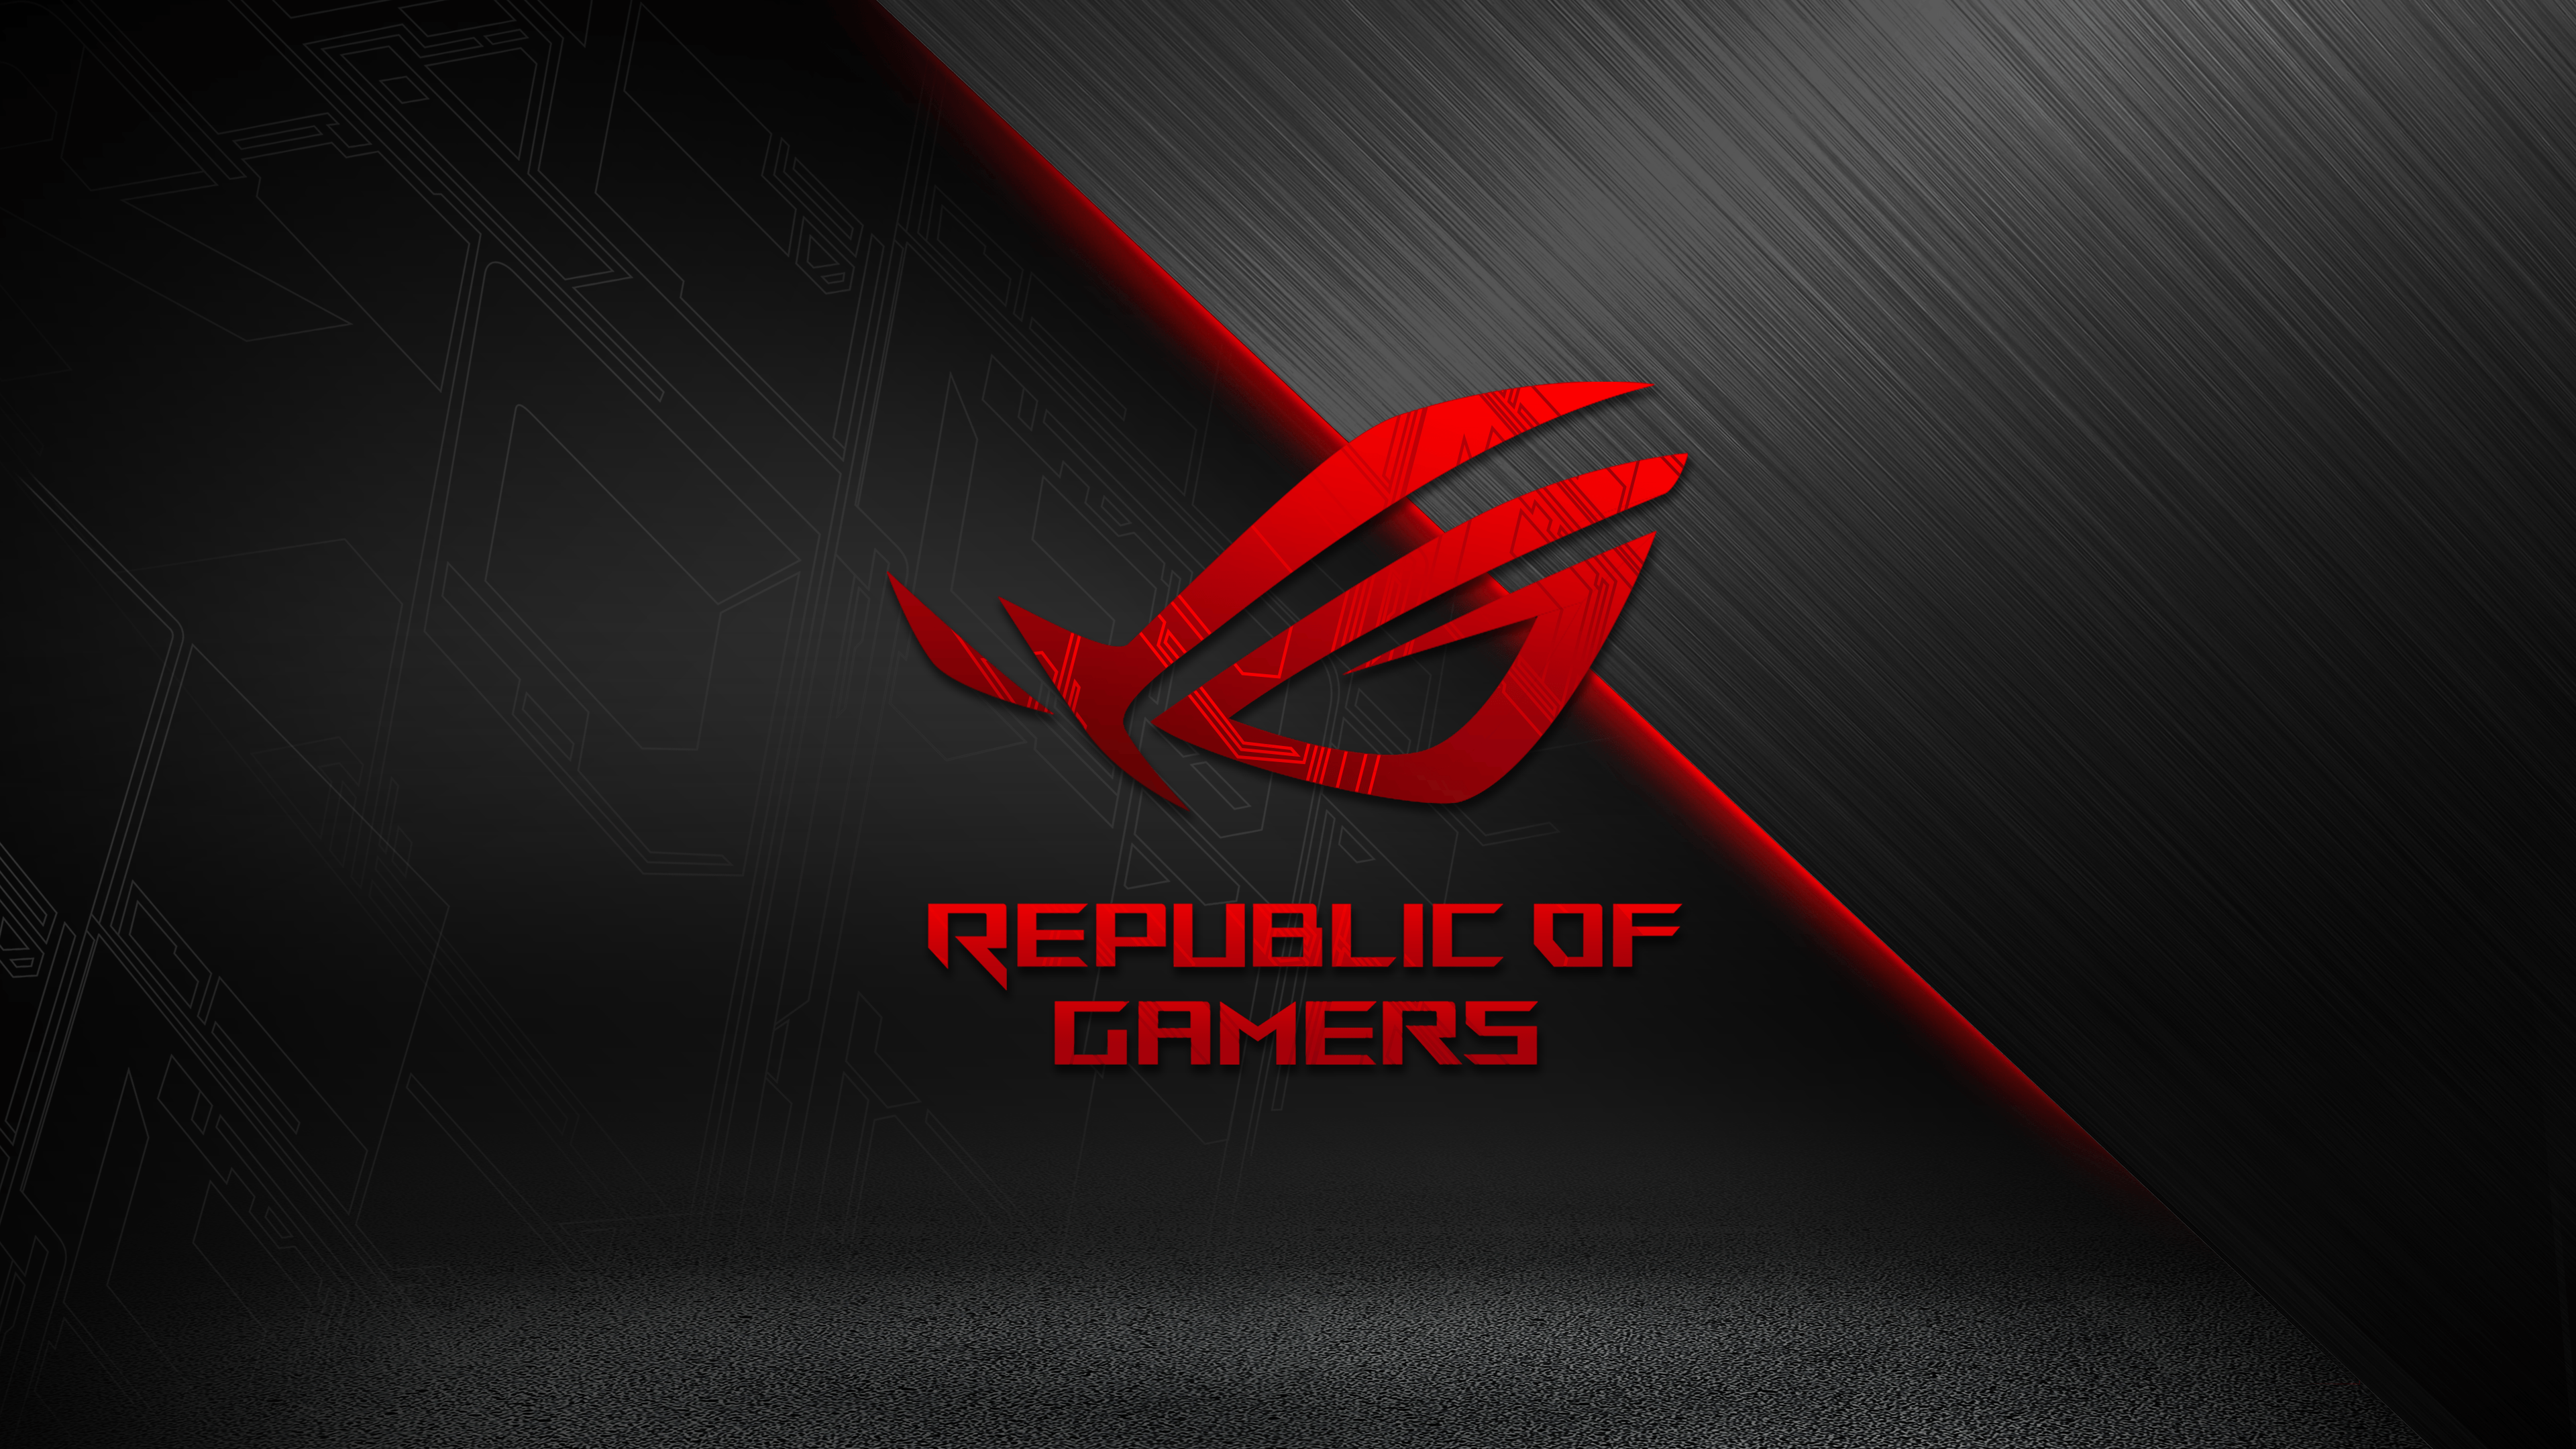 800x1280 Republic Of Gamers Abstract Logo 4k Nexus 7,Samsung Galaxy Tab  10,Note Android Tablets ,HD 4k Wallpapers,Images,Backgrounds,Photos and  Pictures